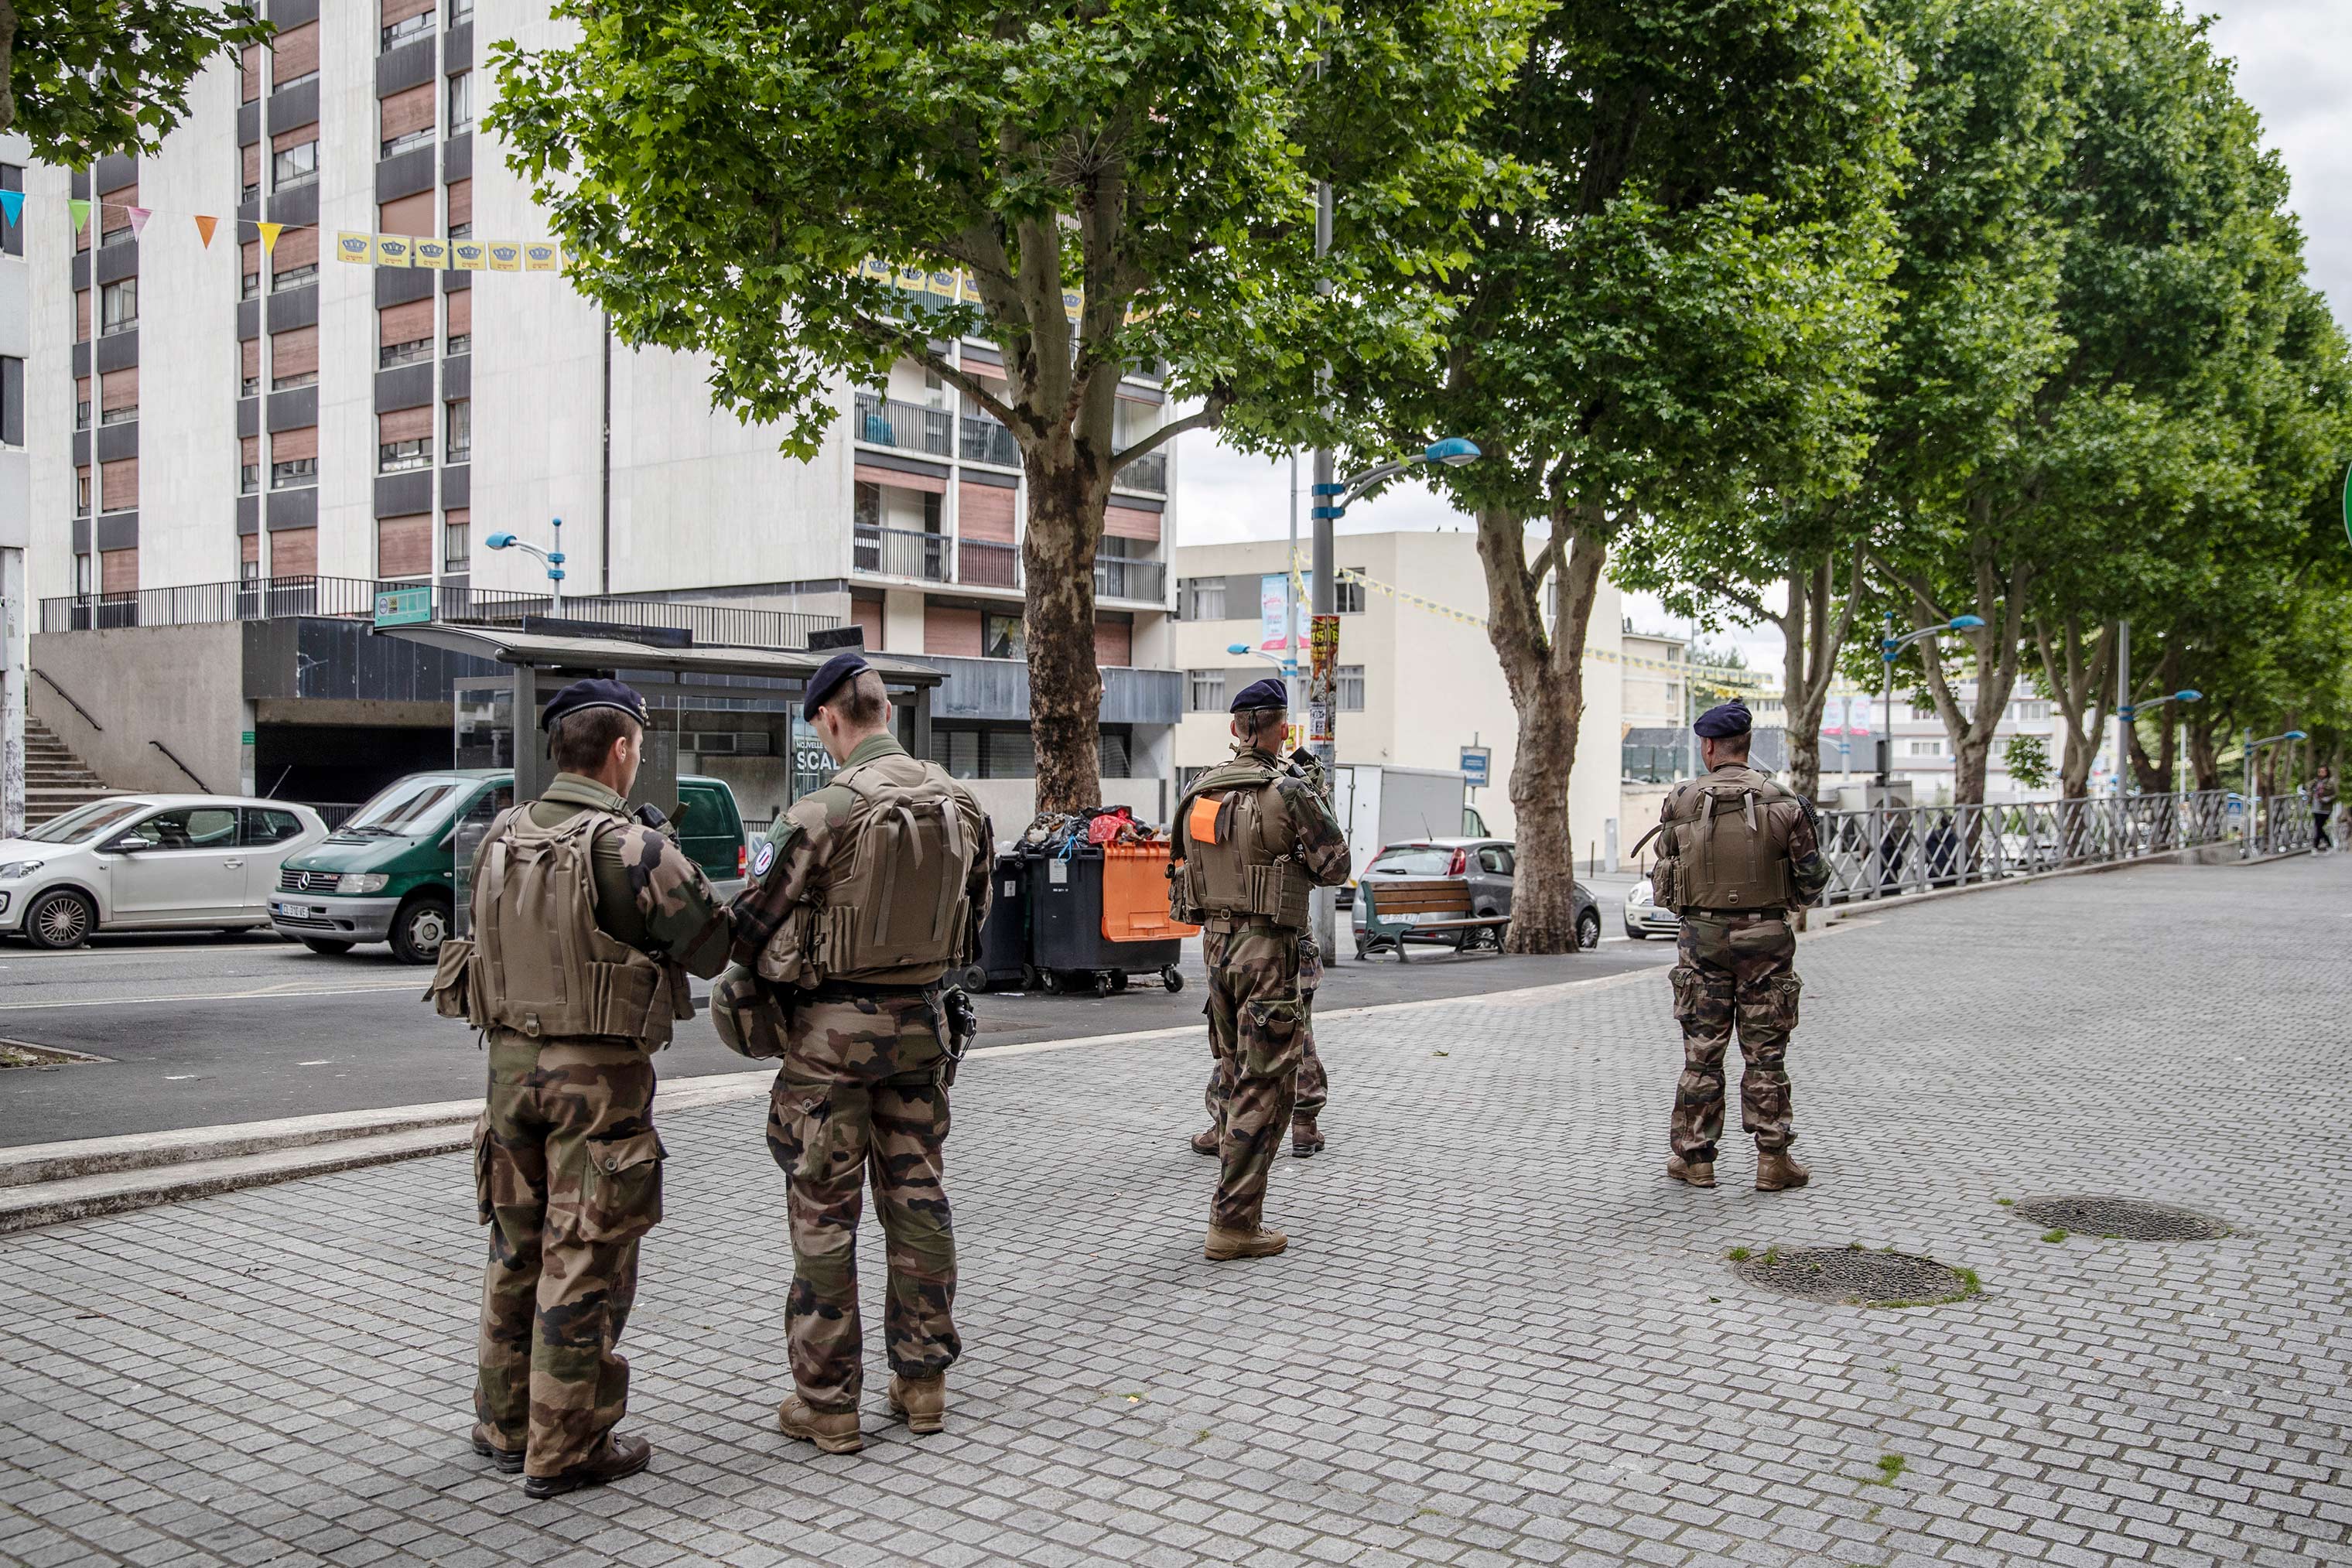 French soldiers patrol streets in the Jewish quarter of Sarcelles, France. Jews and Arab immigrants have lived alongside each other in the area for decades. (Magnus Wennman for TIME)